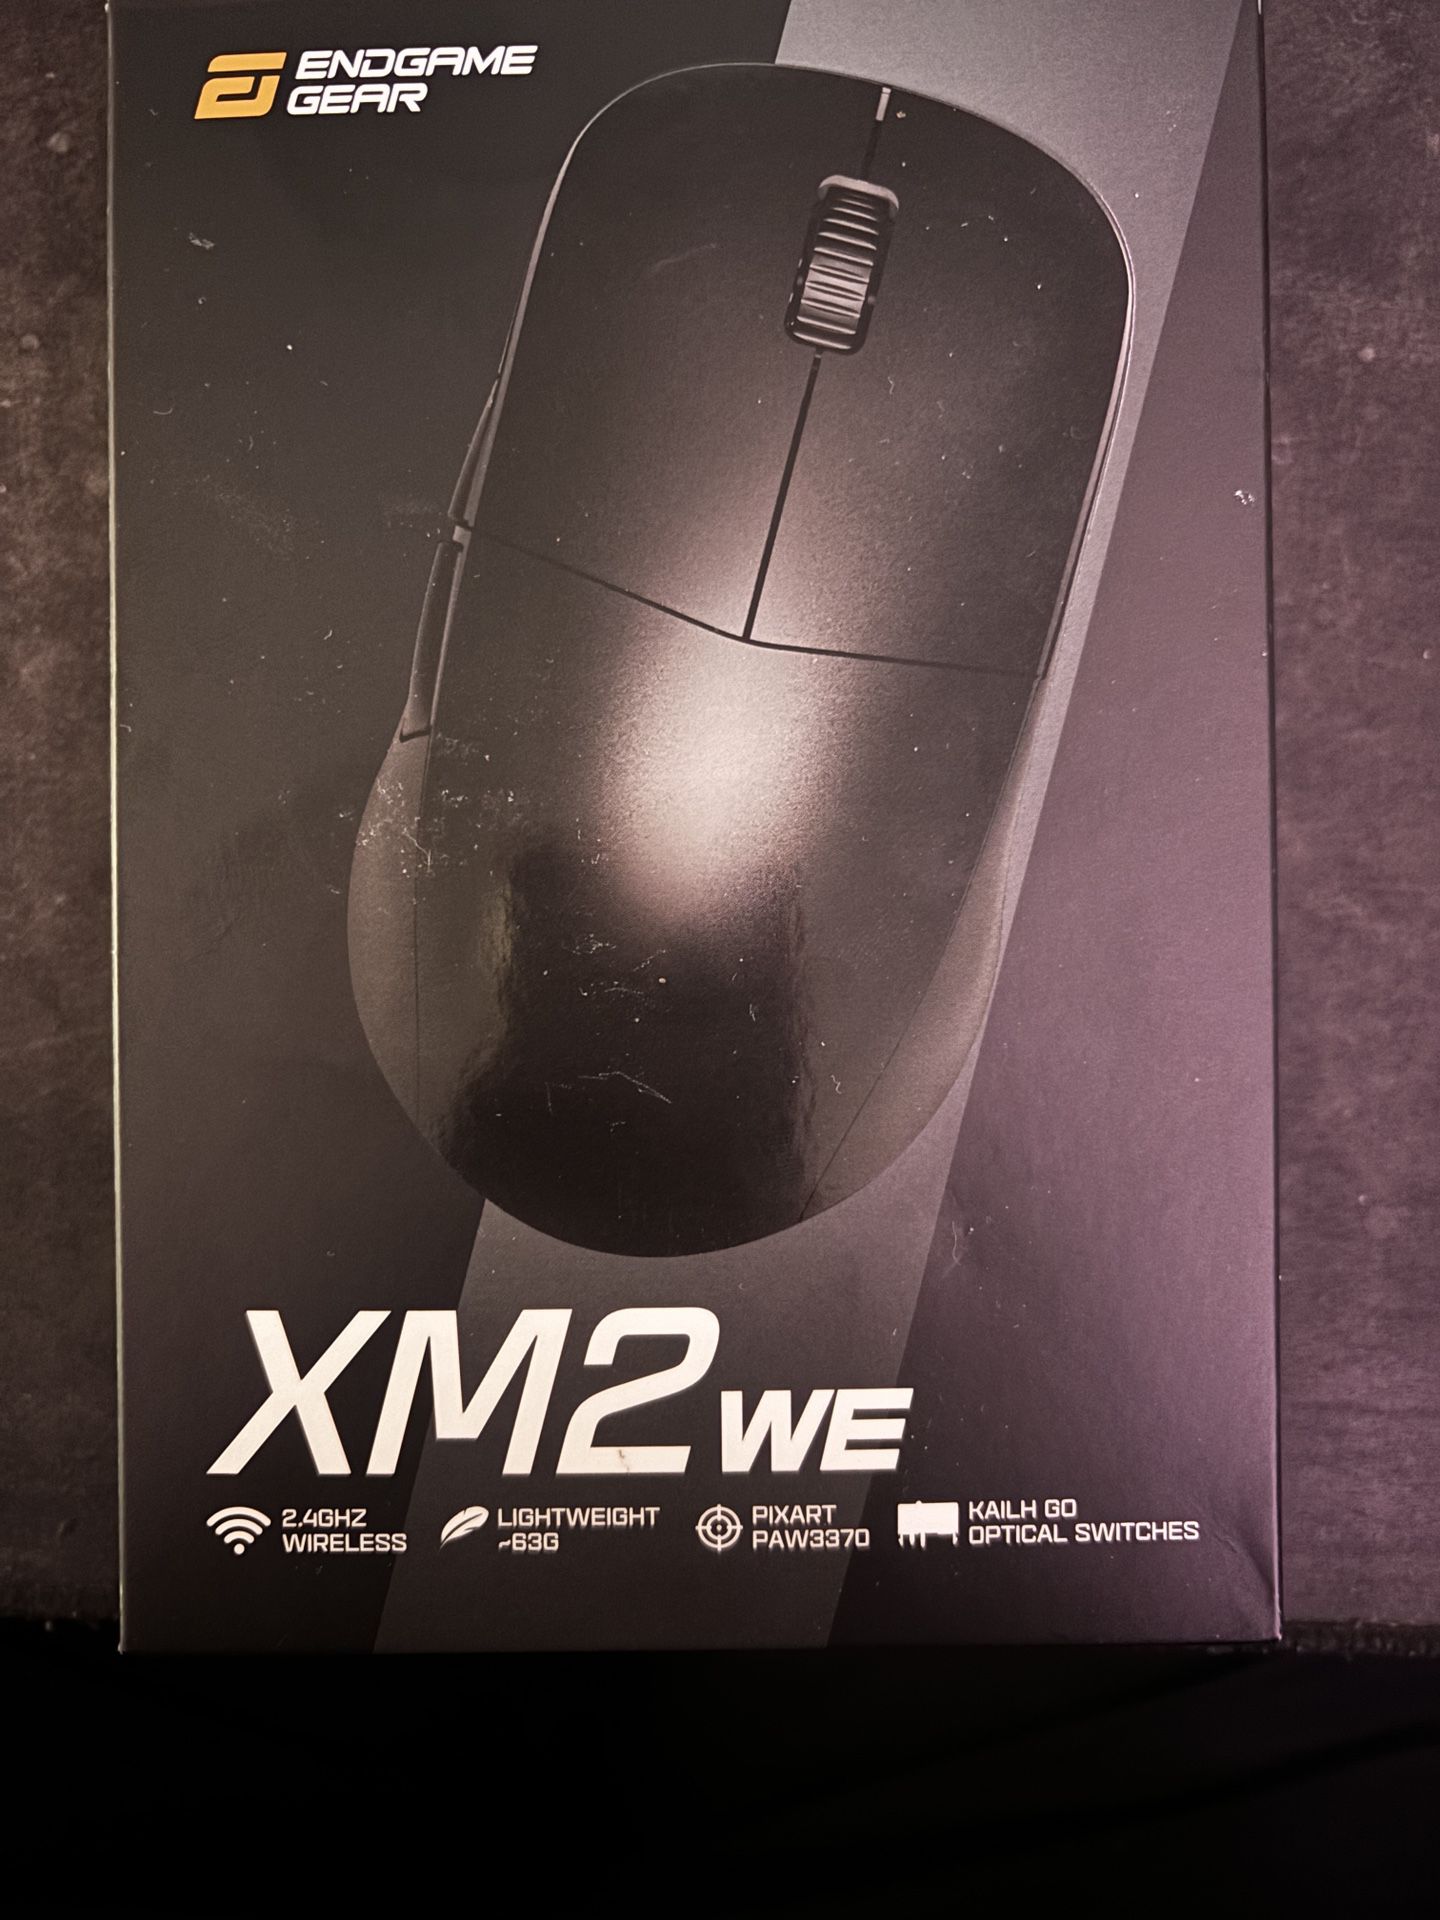 XM2 we - wireless gaming mouse